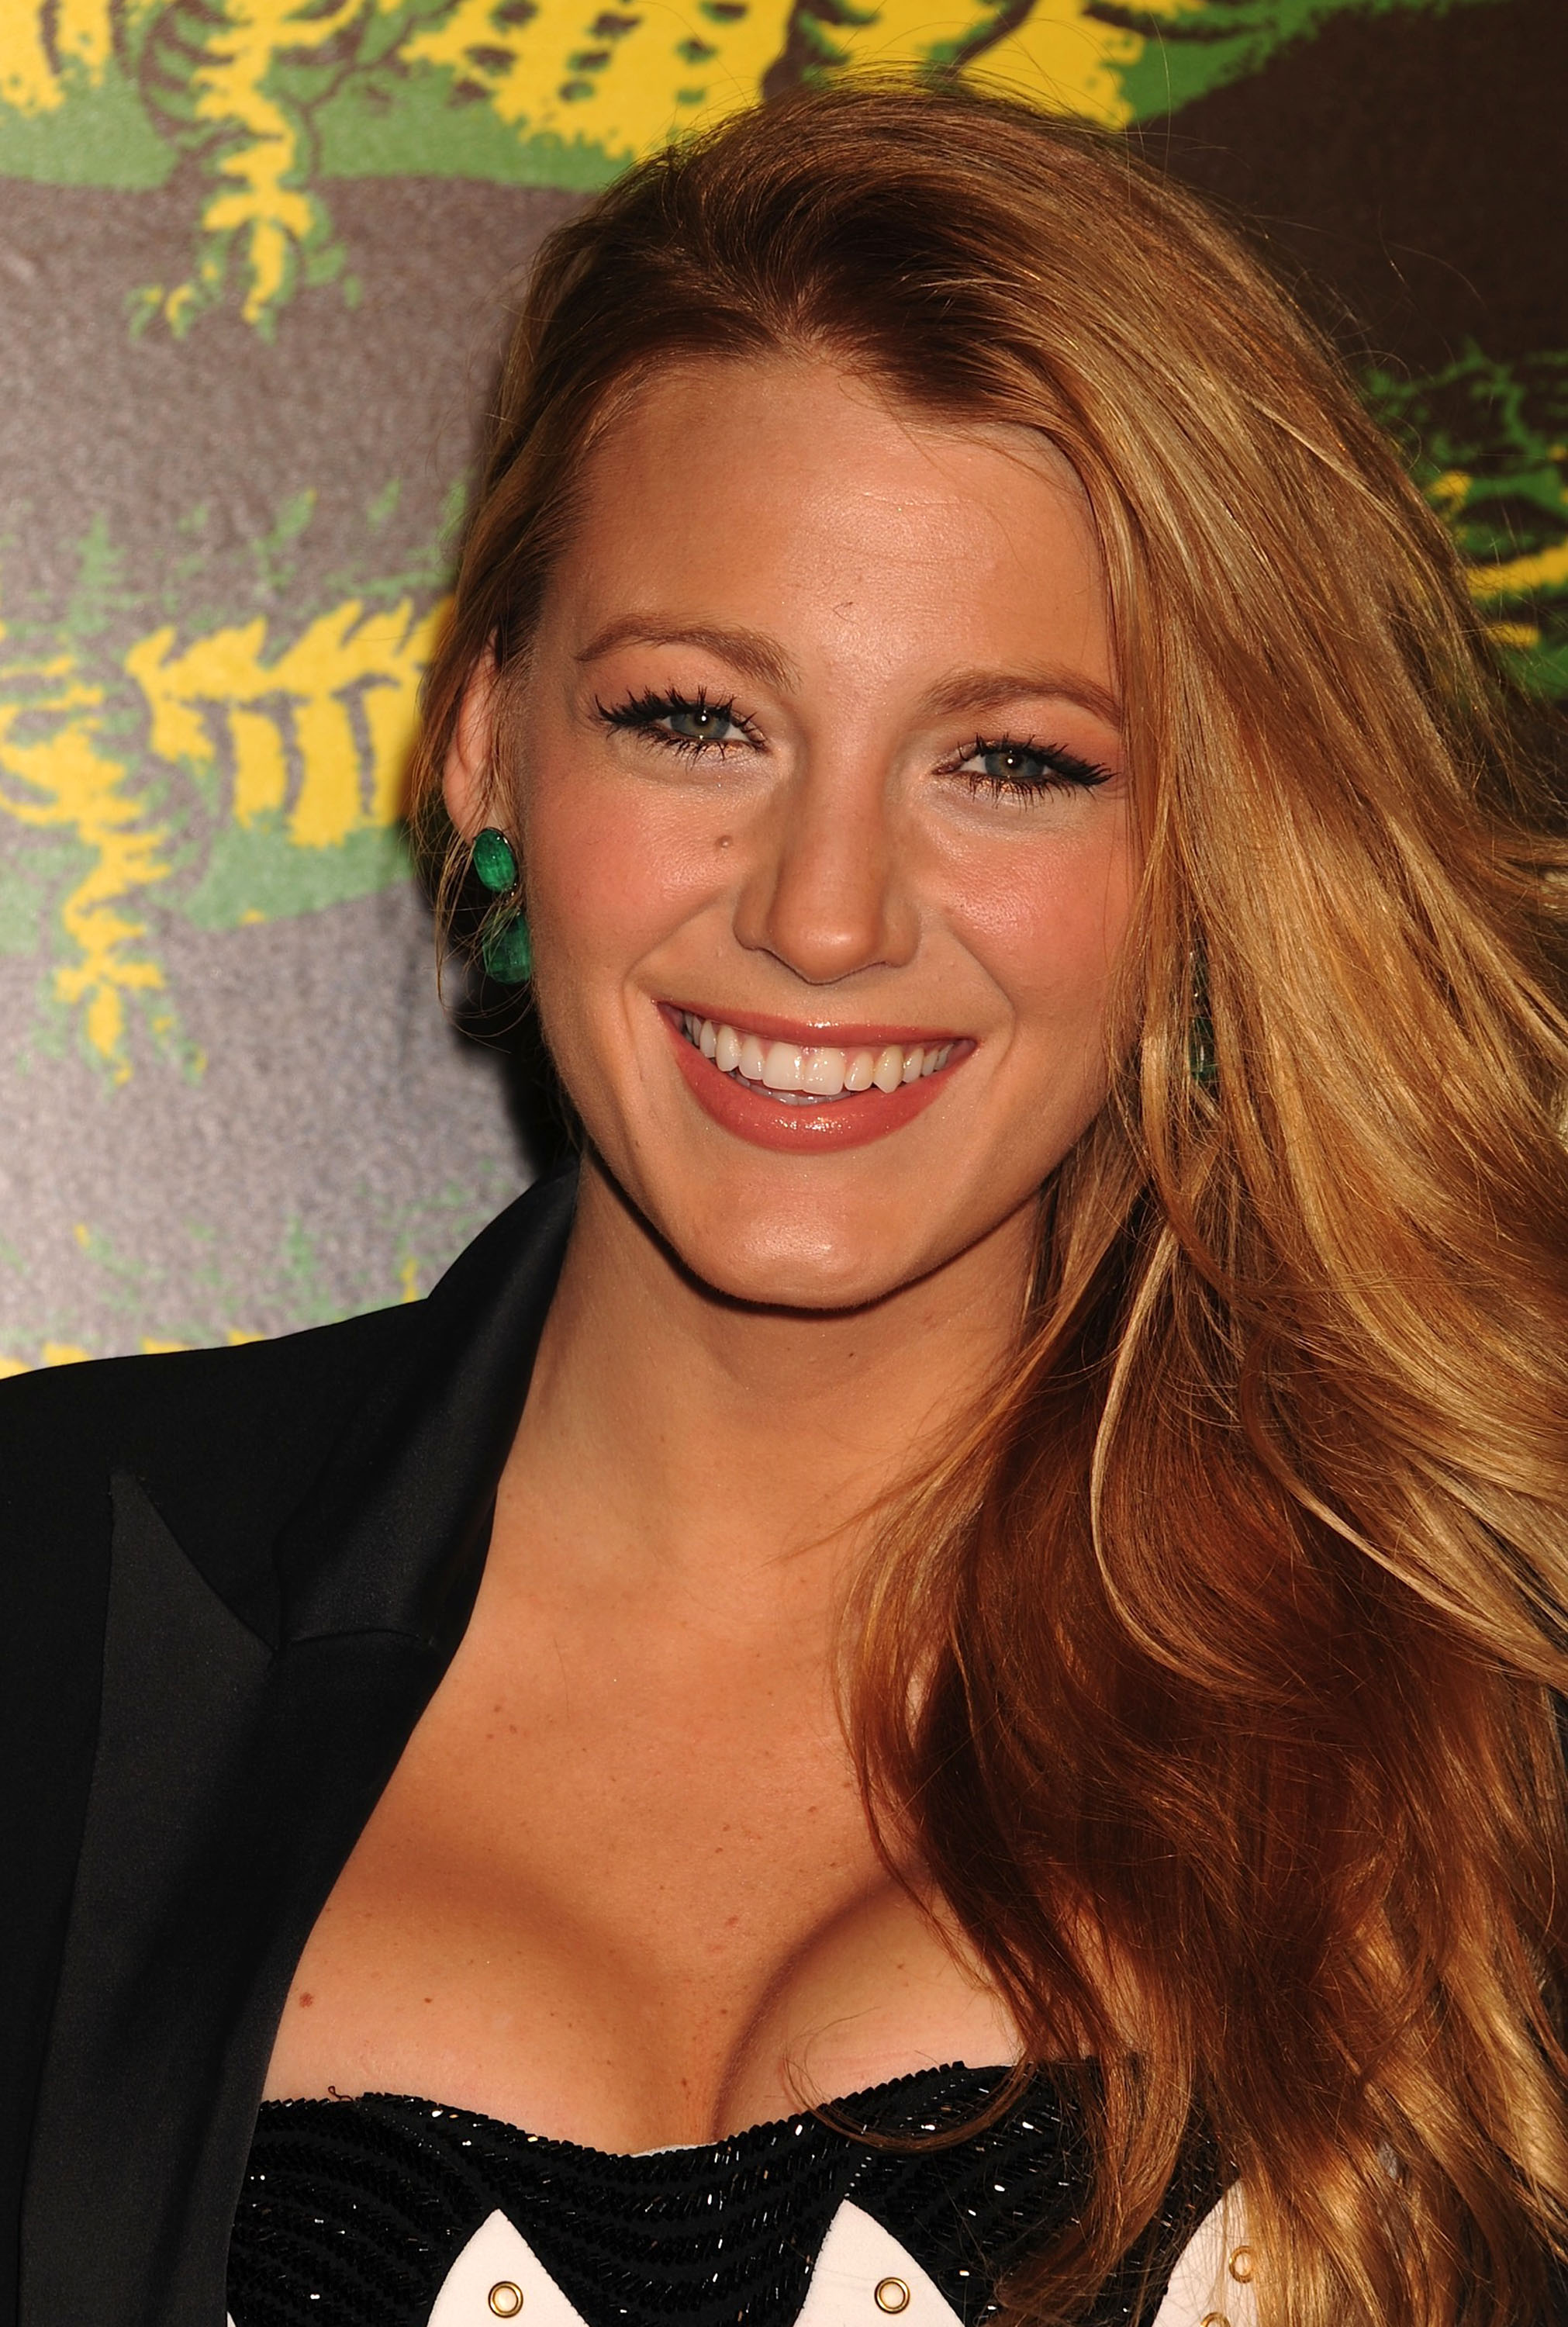 Blake Lively 2011 : Blake Lively – Cleavage Candids at Versace For H&M fashion Event in NY-05